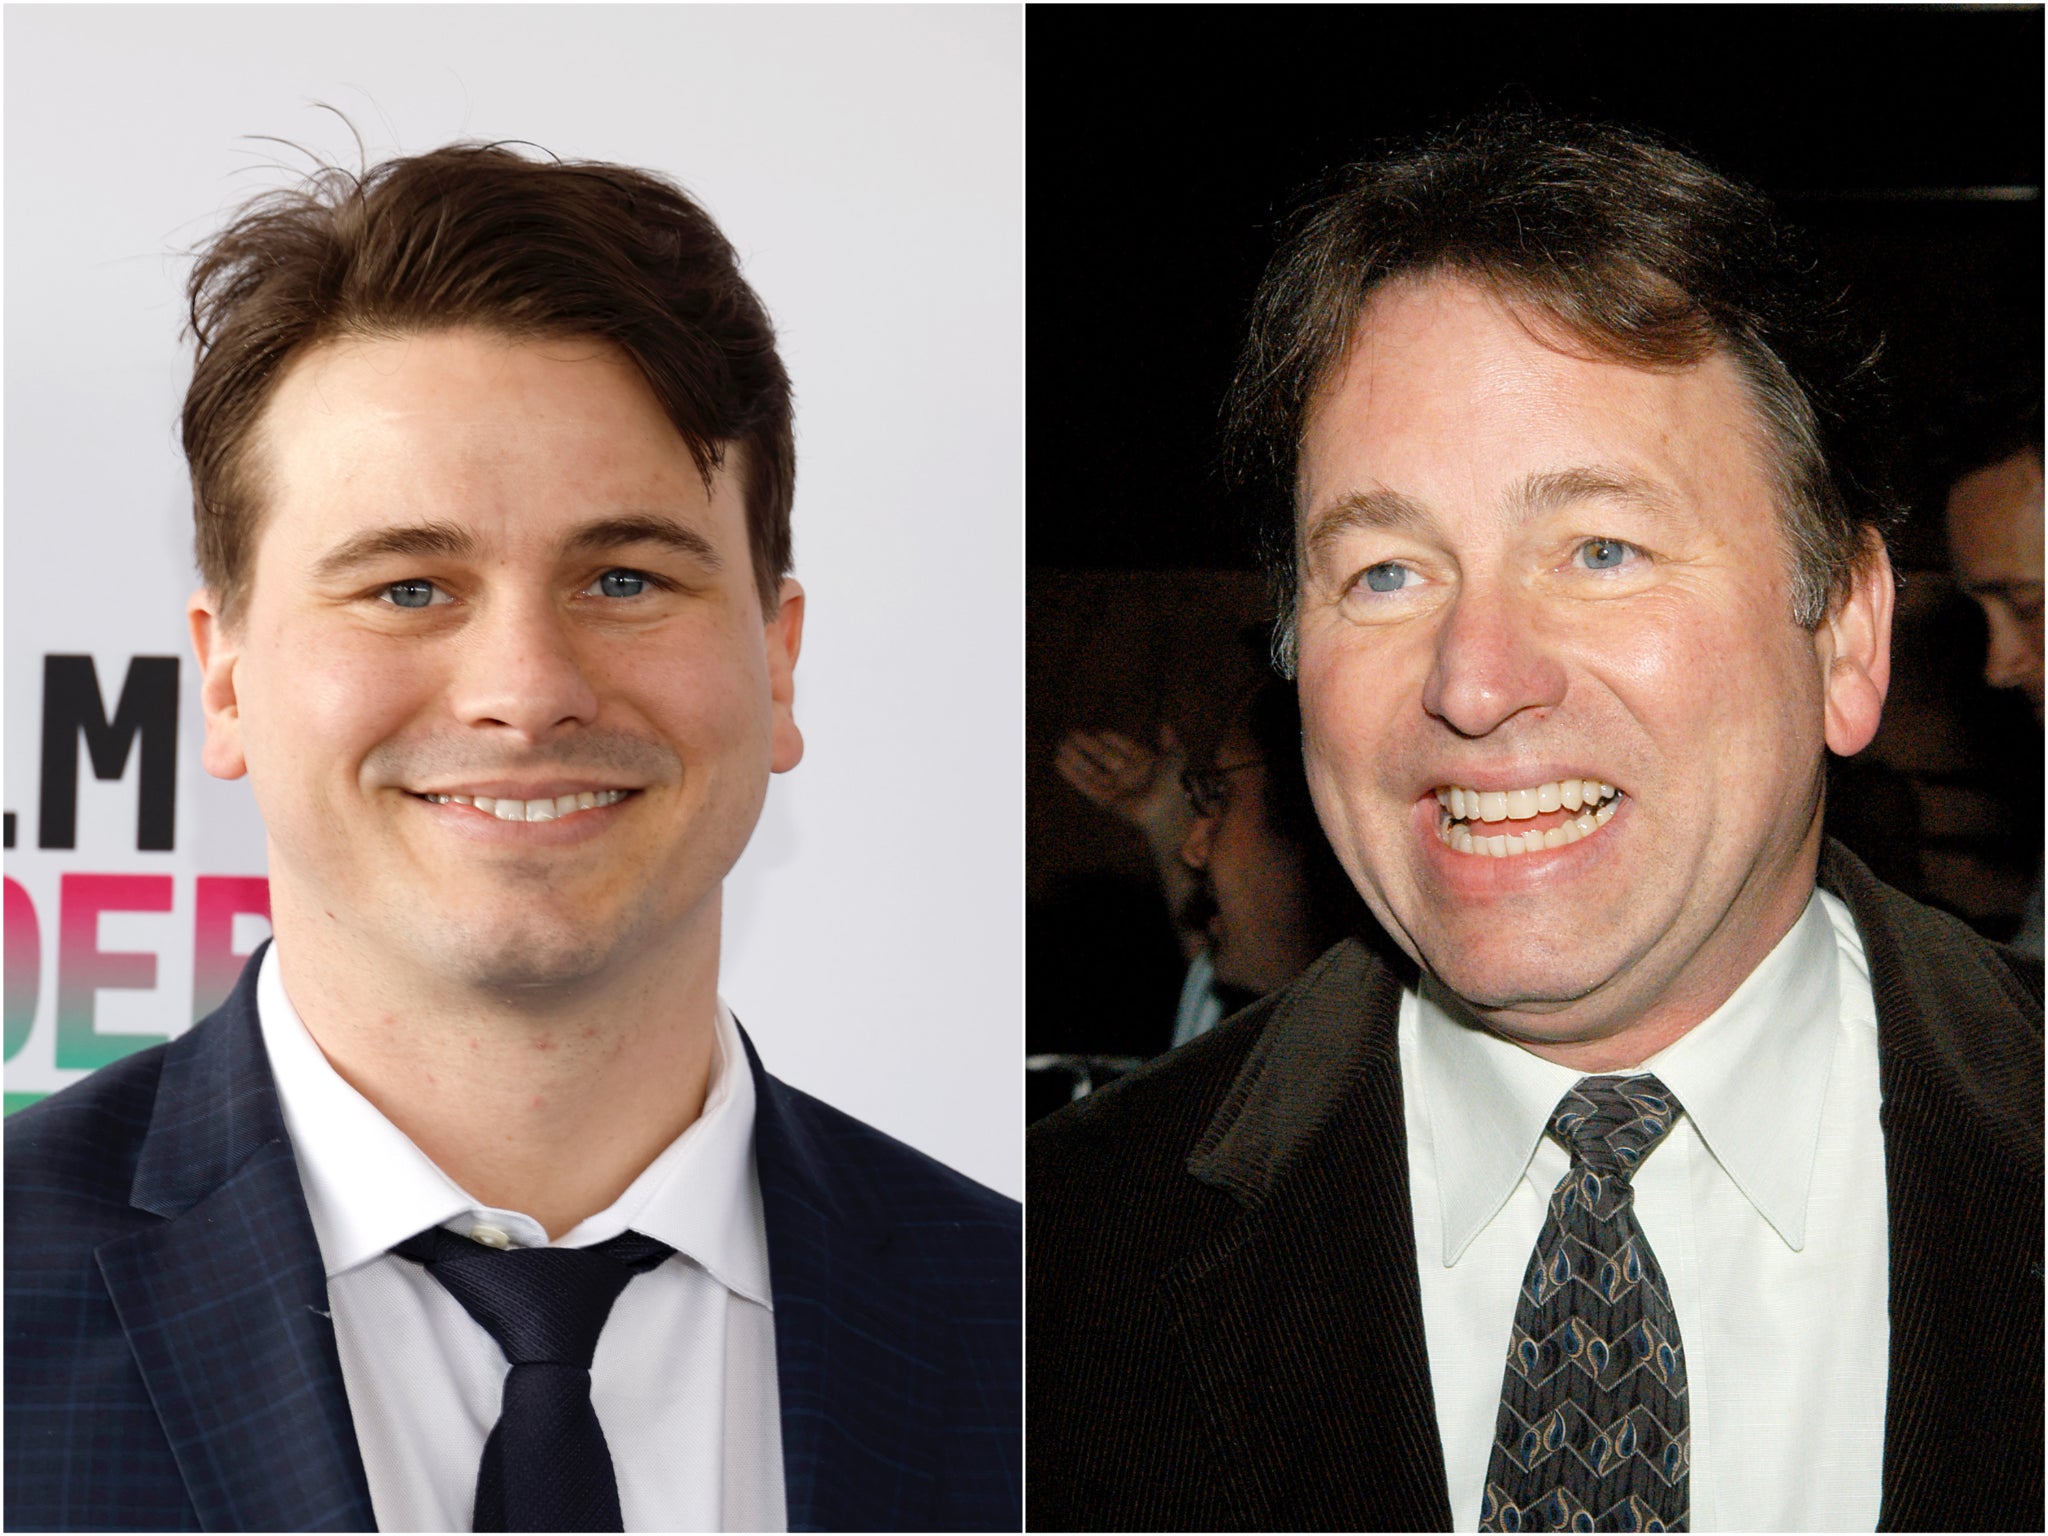 Jason Ritter (left) and his father John Ritter